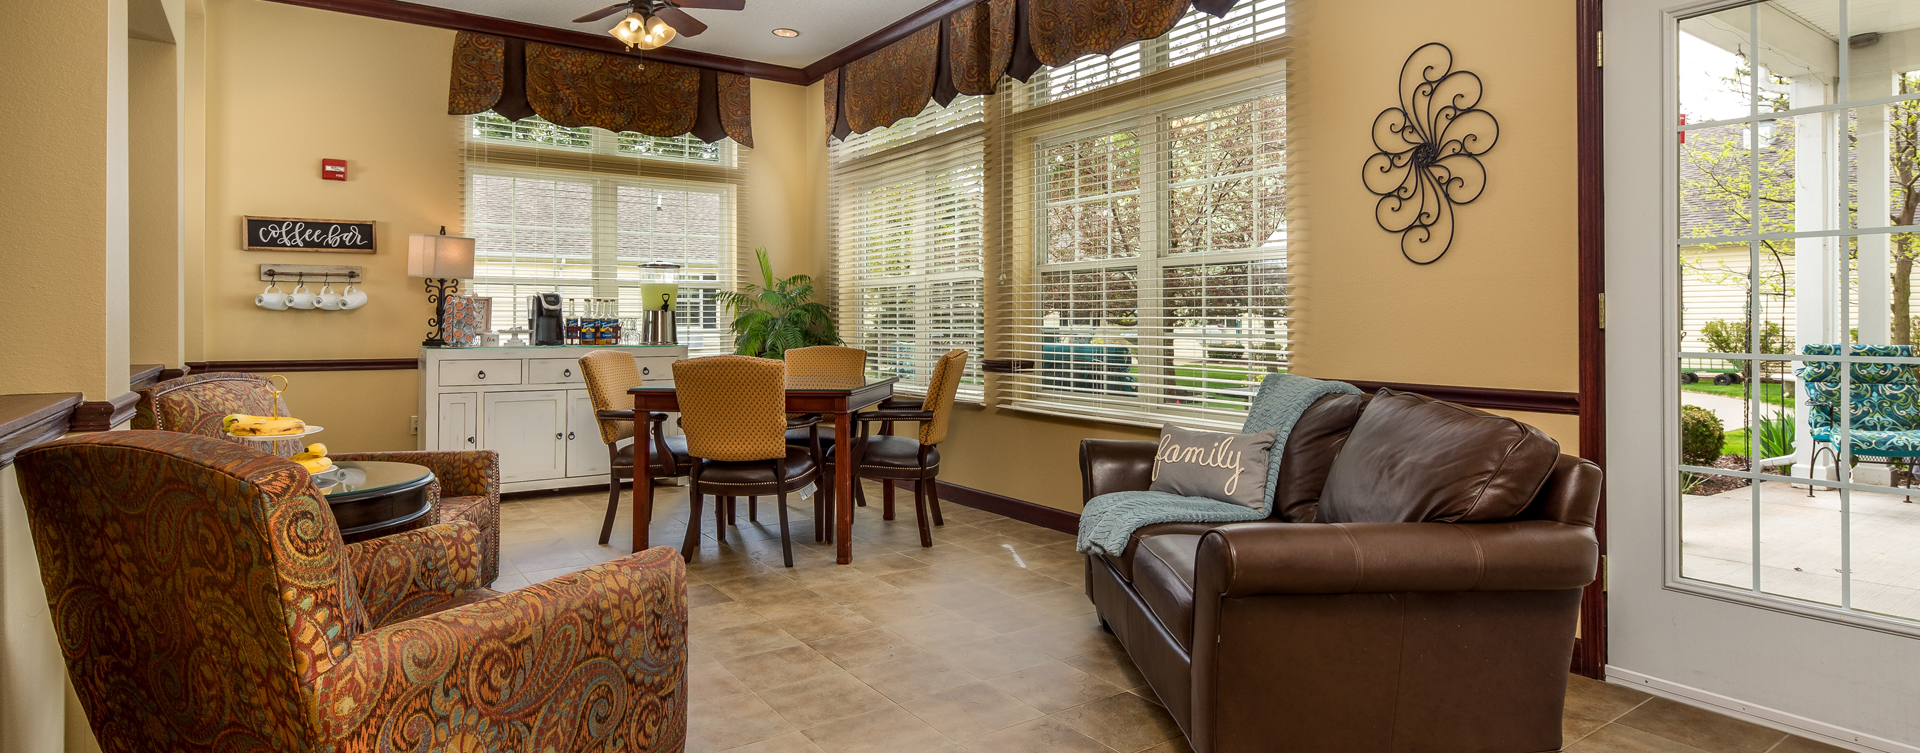 Relax in the warmth of the sunroom at Bickford of Okemos